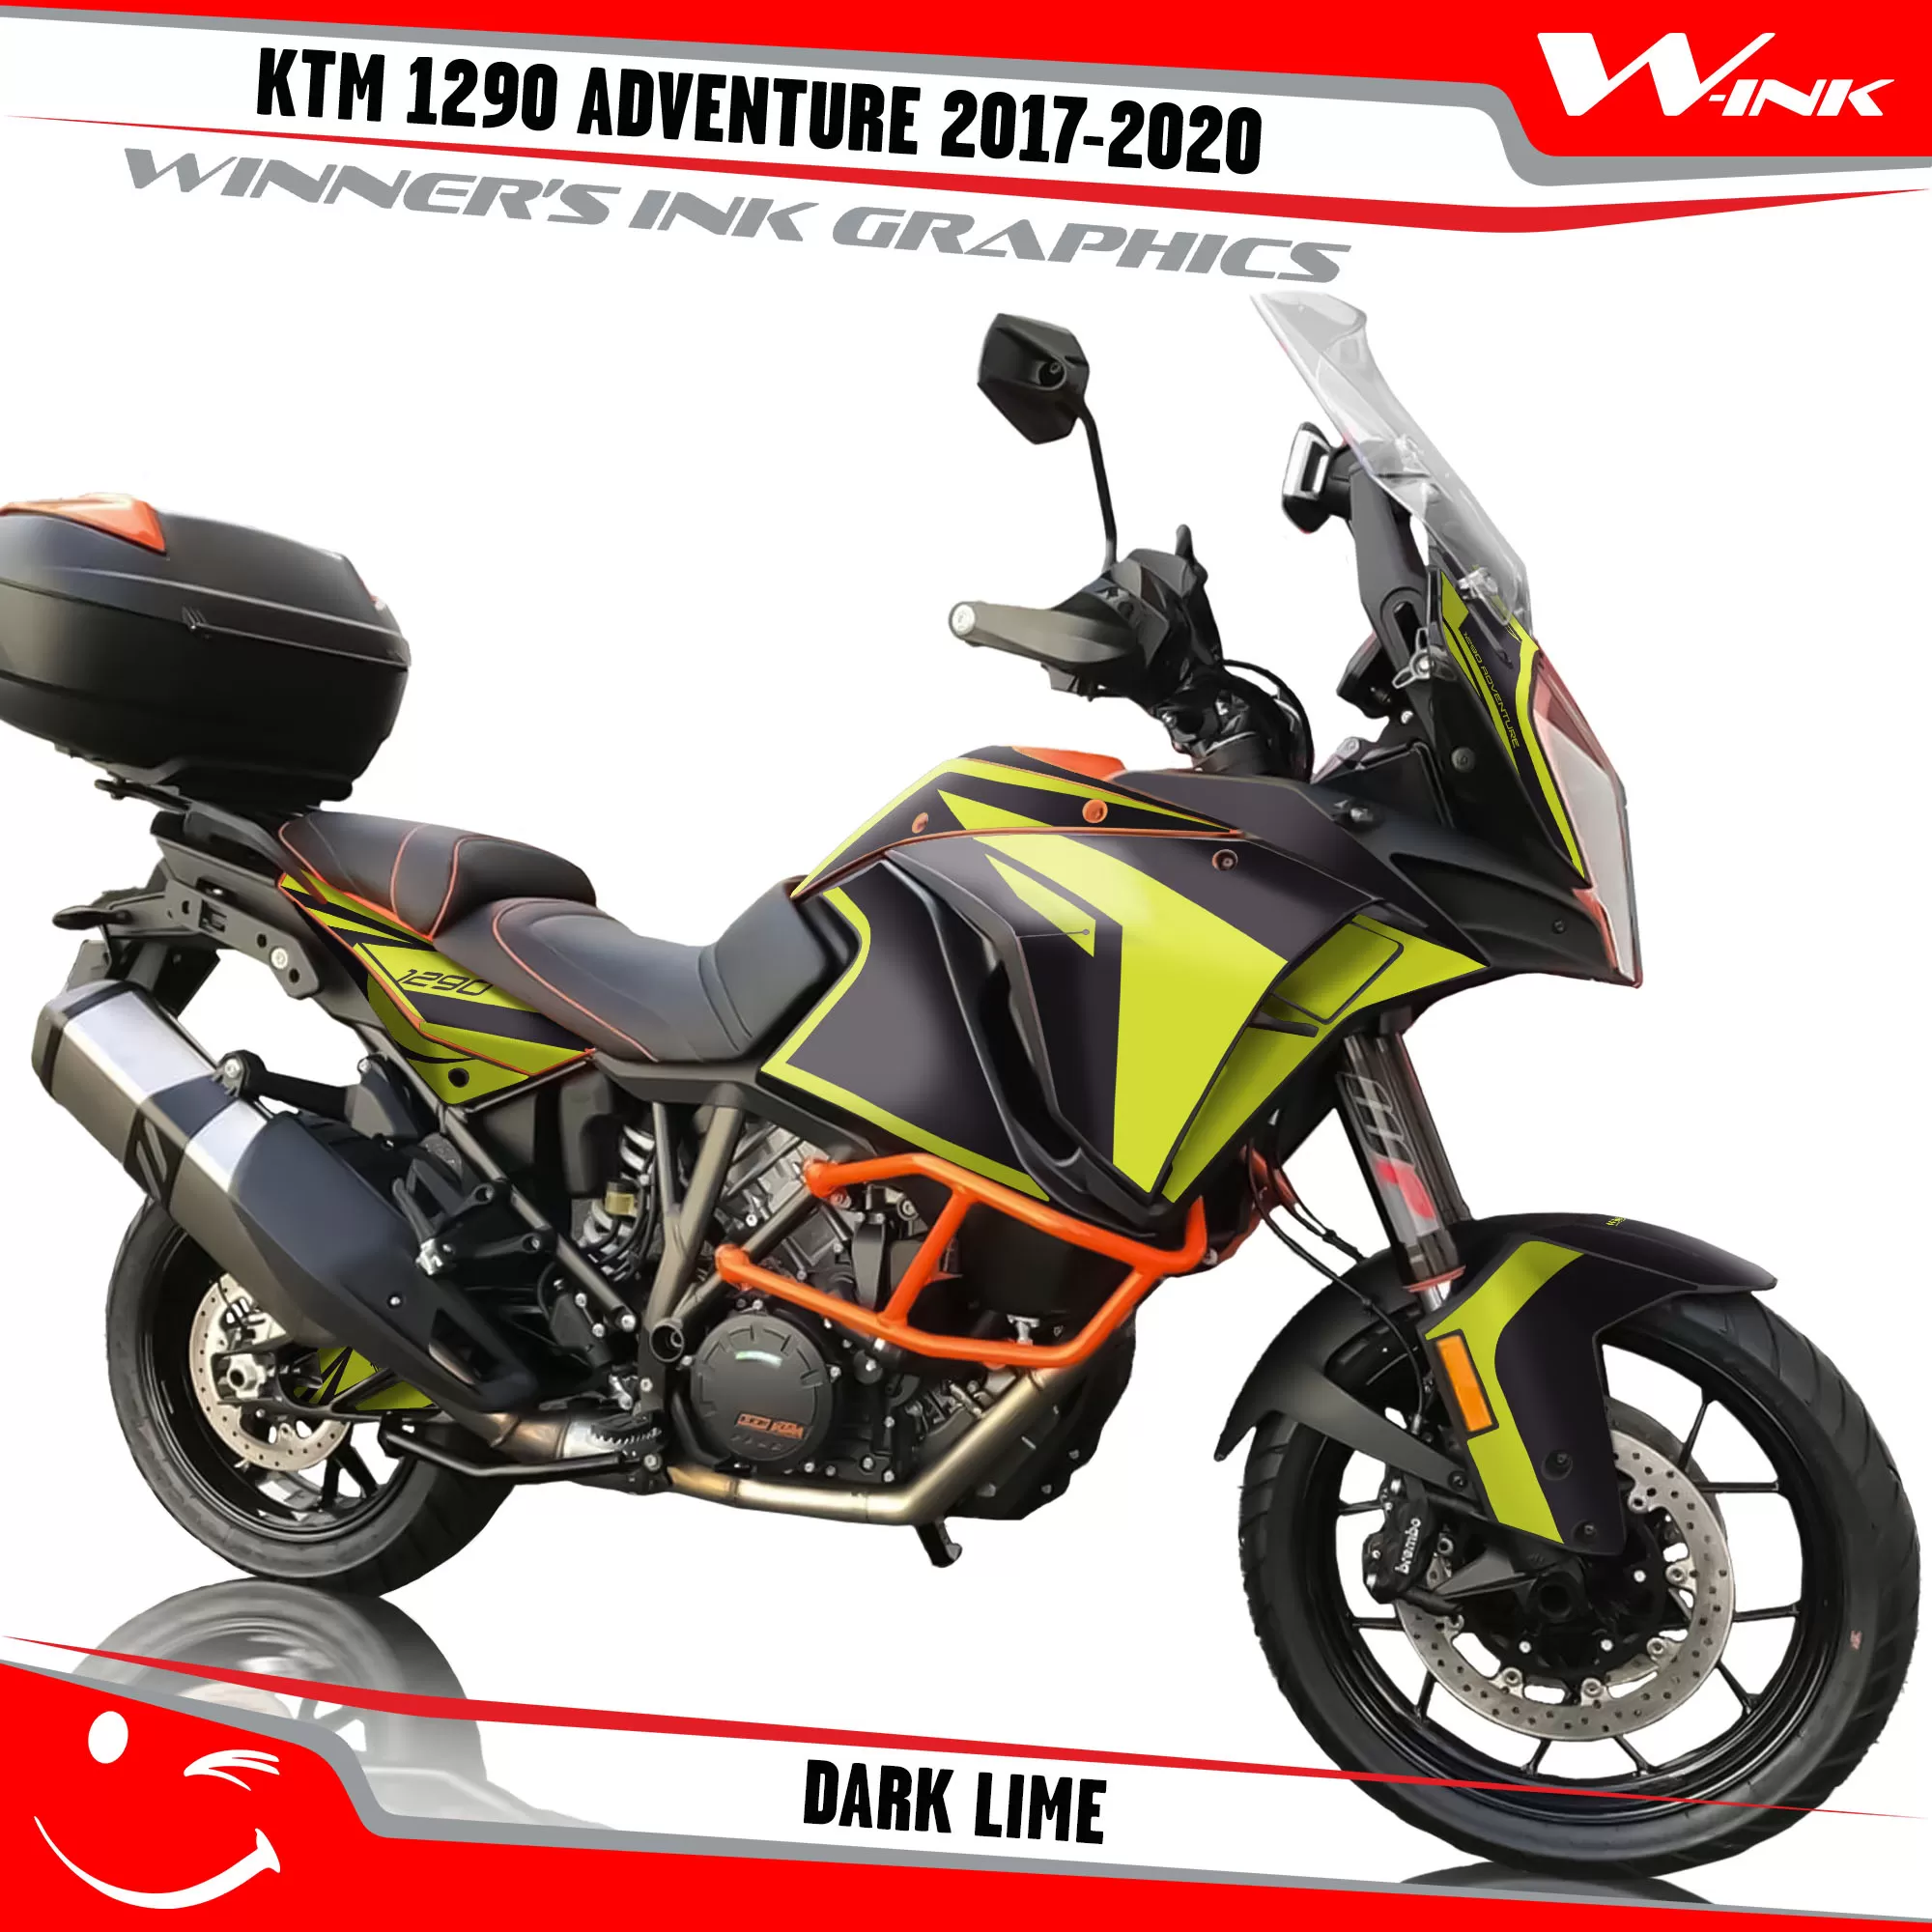 KTM-Adventure-1290-2017-2018-2019-2020-graphics-kit-and-decals-Dark-Lime